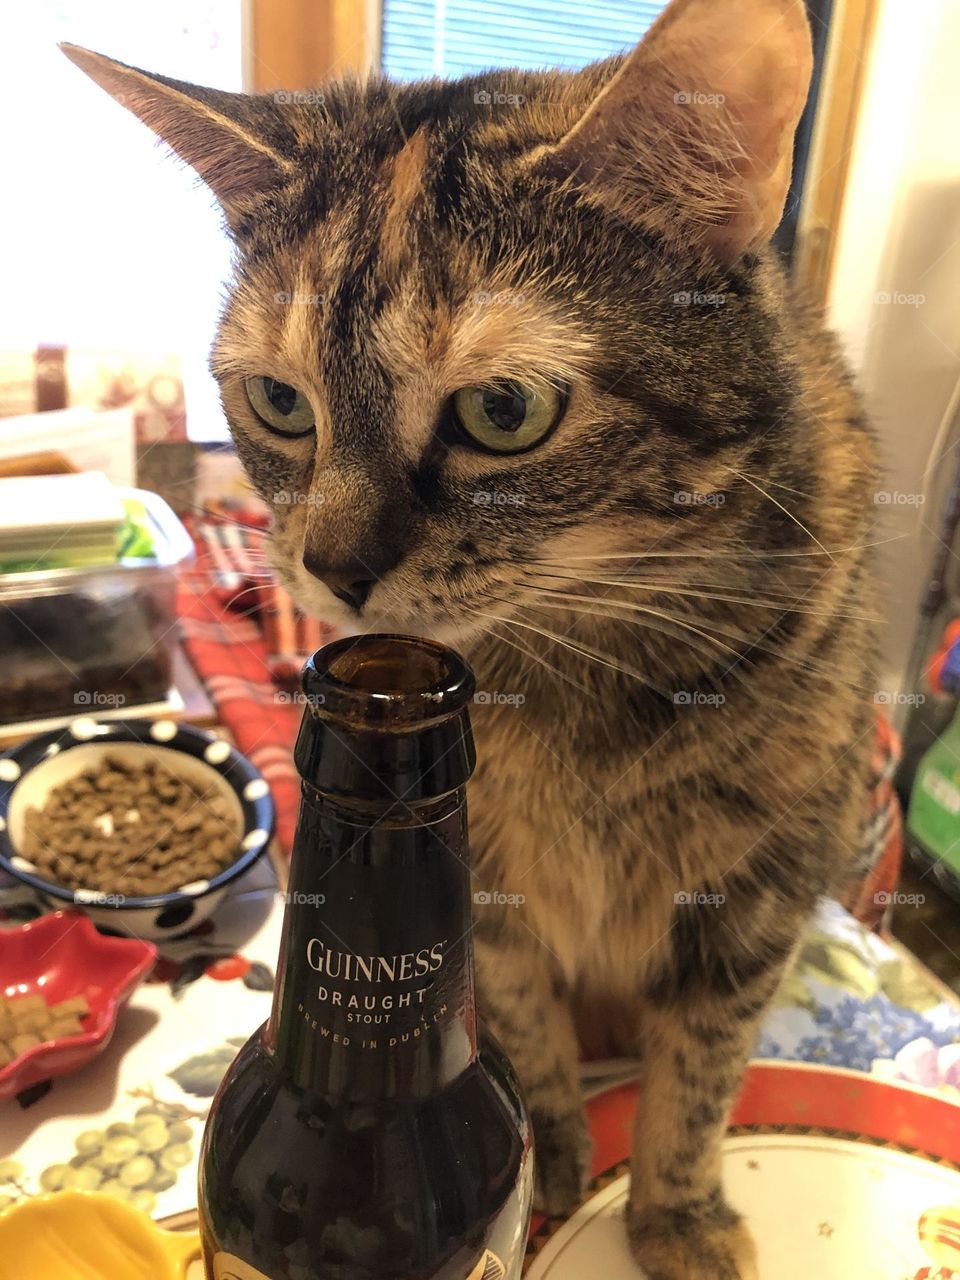 Tasting the flavor of the beer 🐾🍺